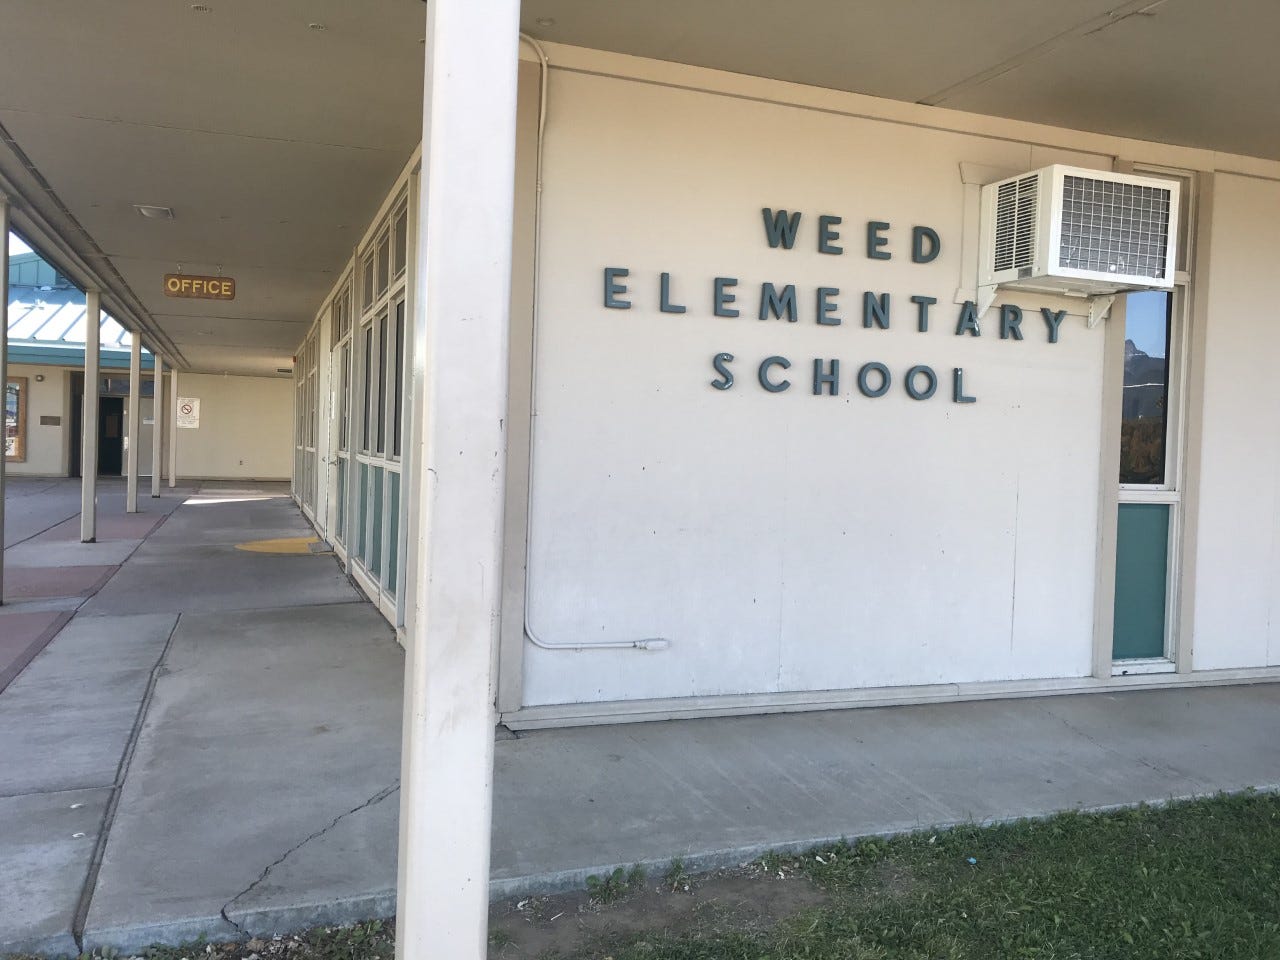 The Weed Elementary School building that houses the office, library and two special day classrooms has been affected by dangerous black mold.